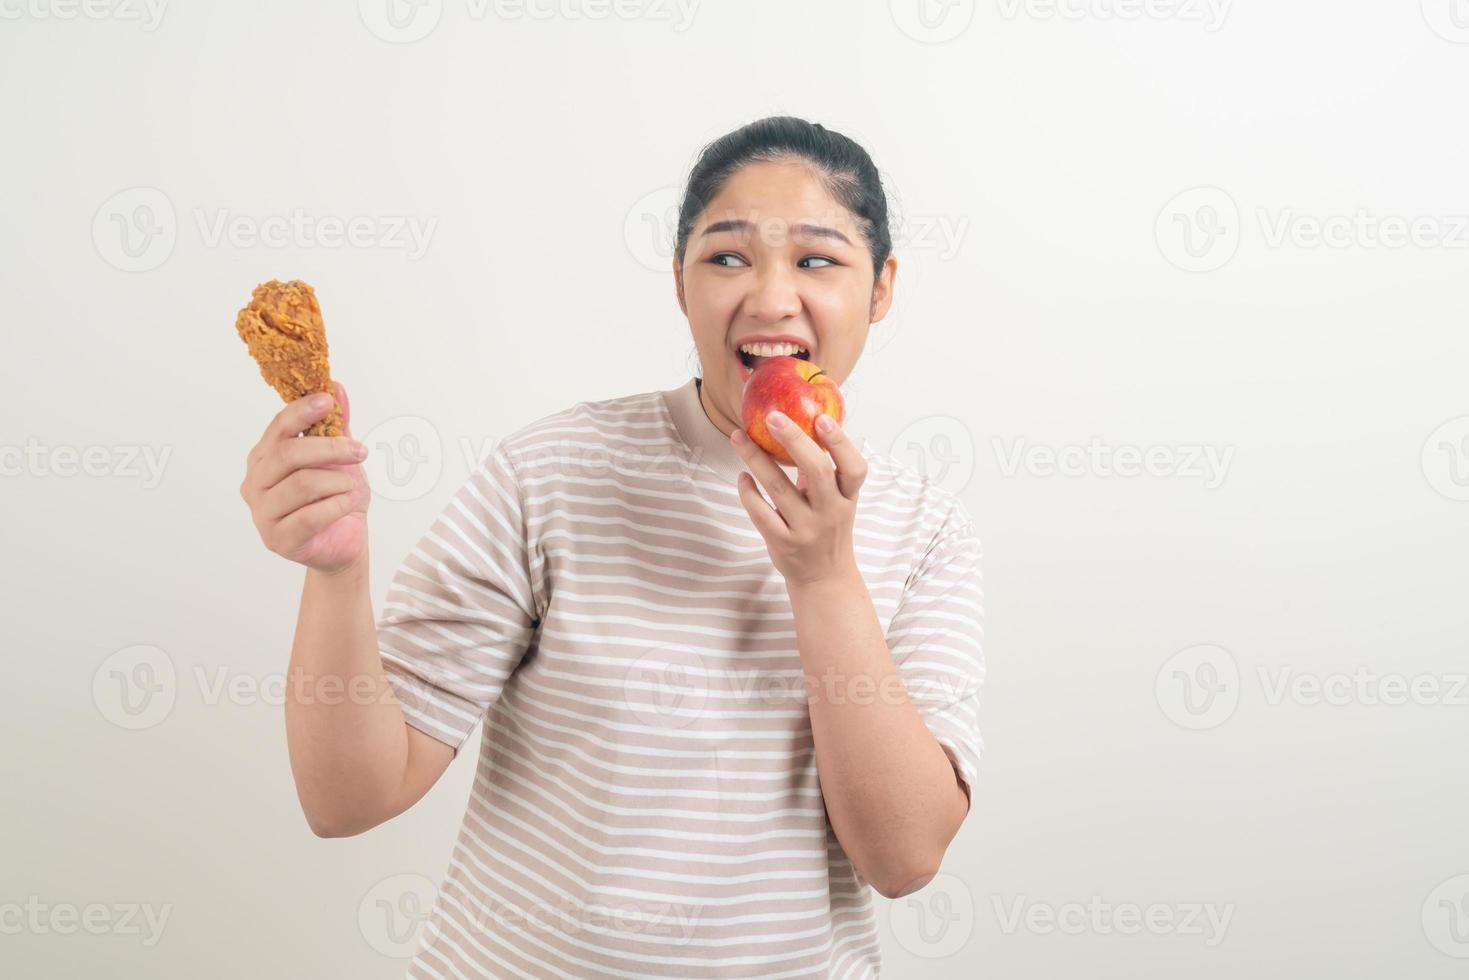 Asian woman with fried chicken and apple on hand photo